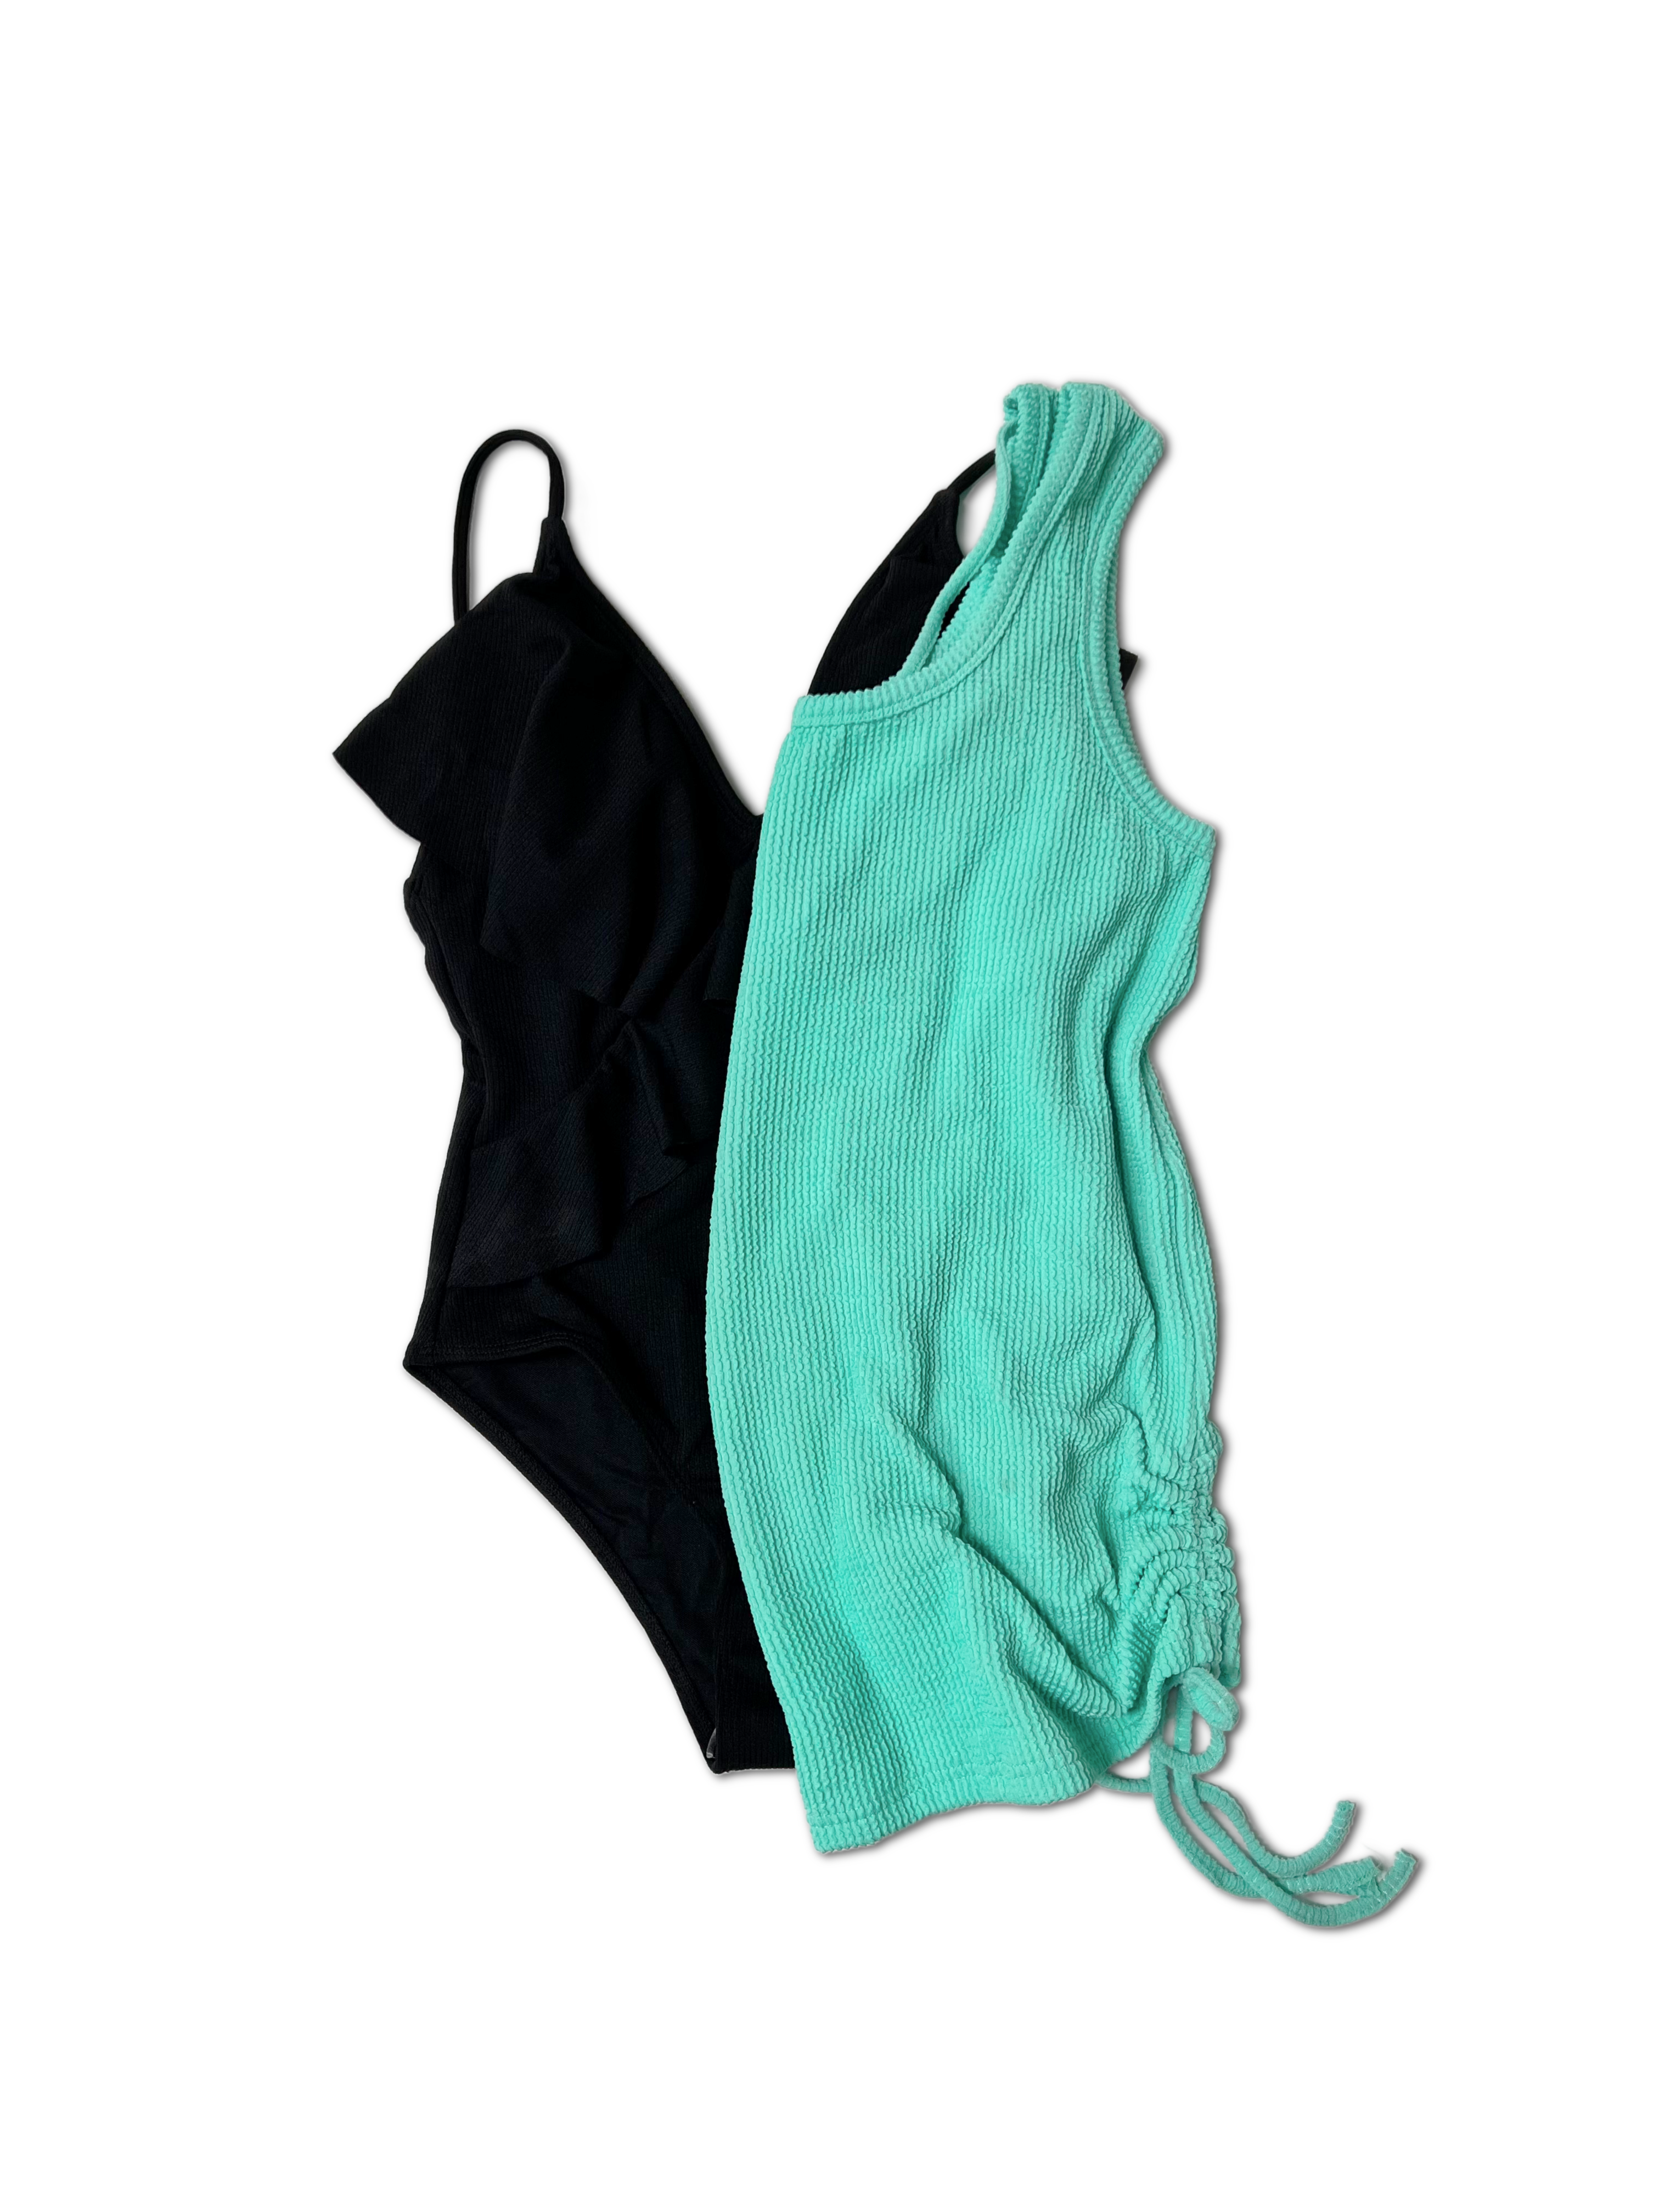 Take it Slow - Neon Mint Coverup  Boutique Simplified   